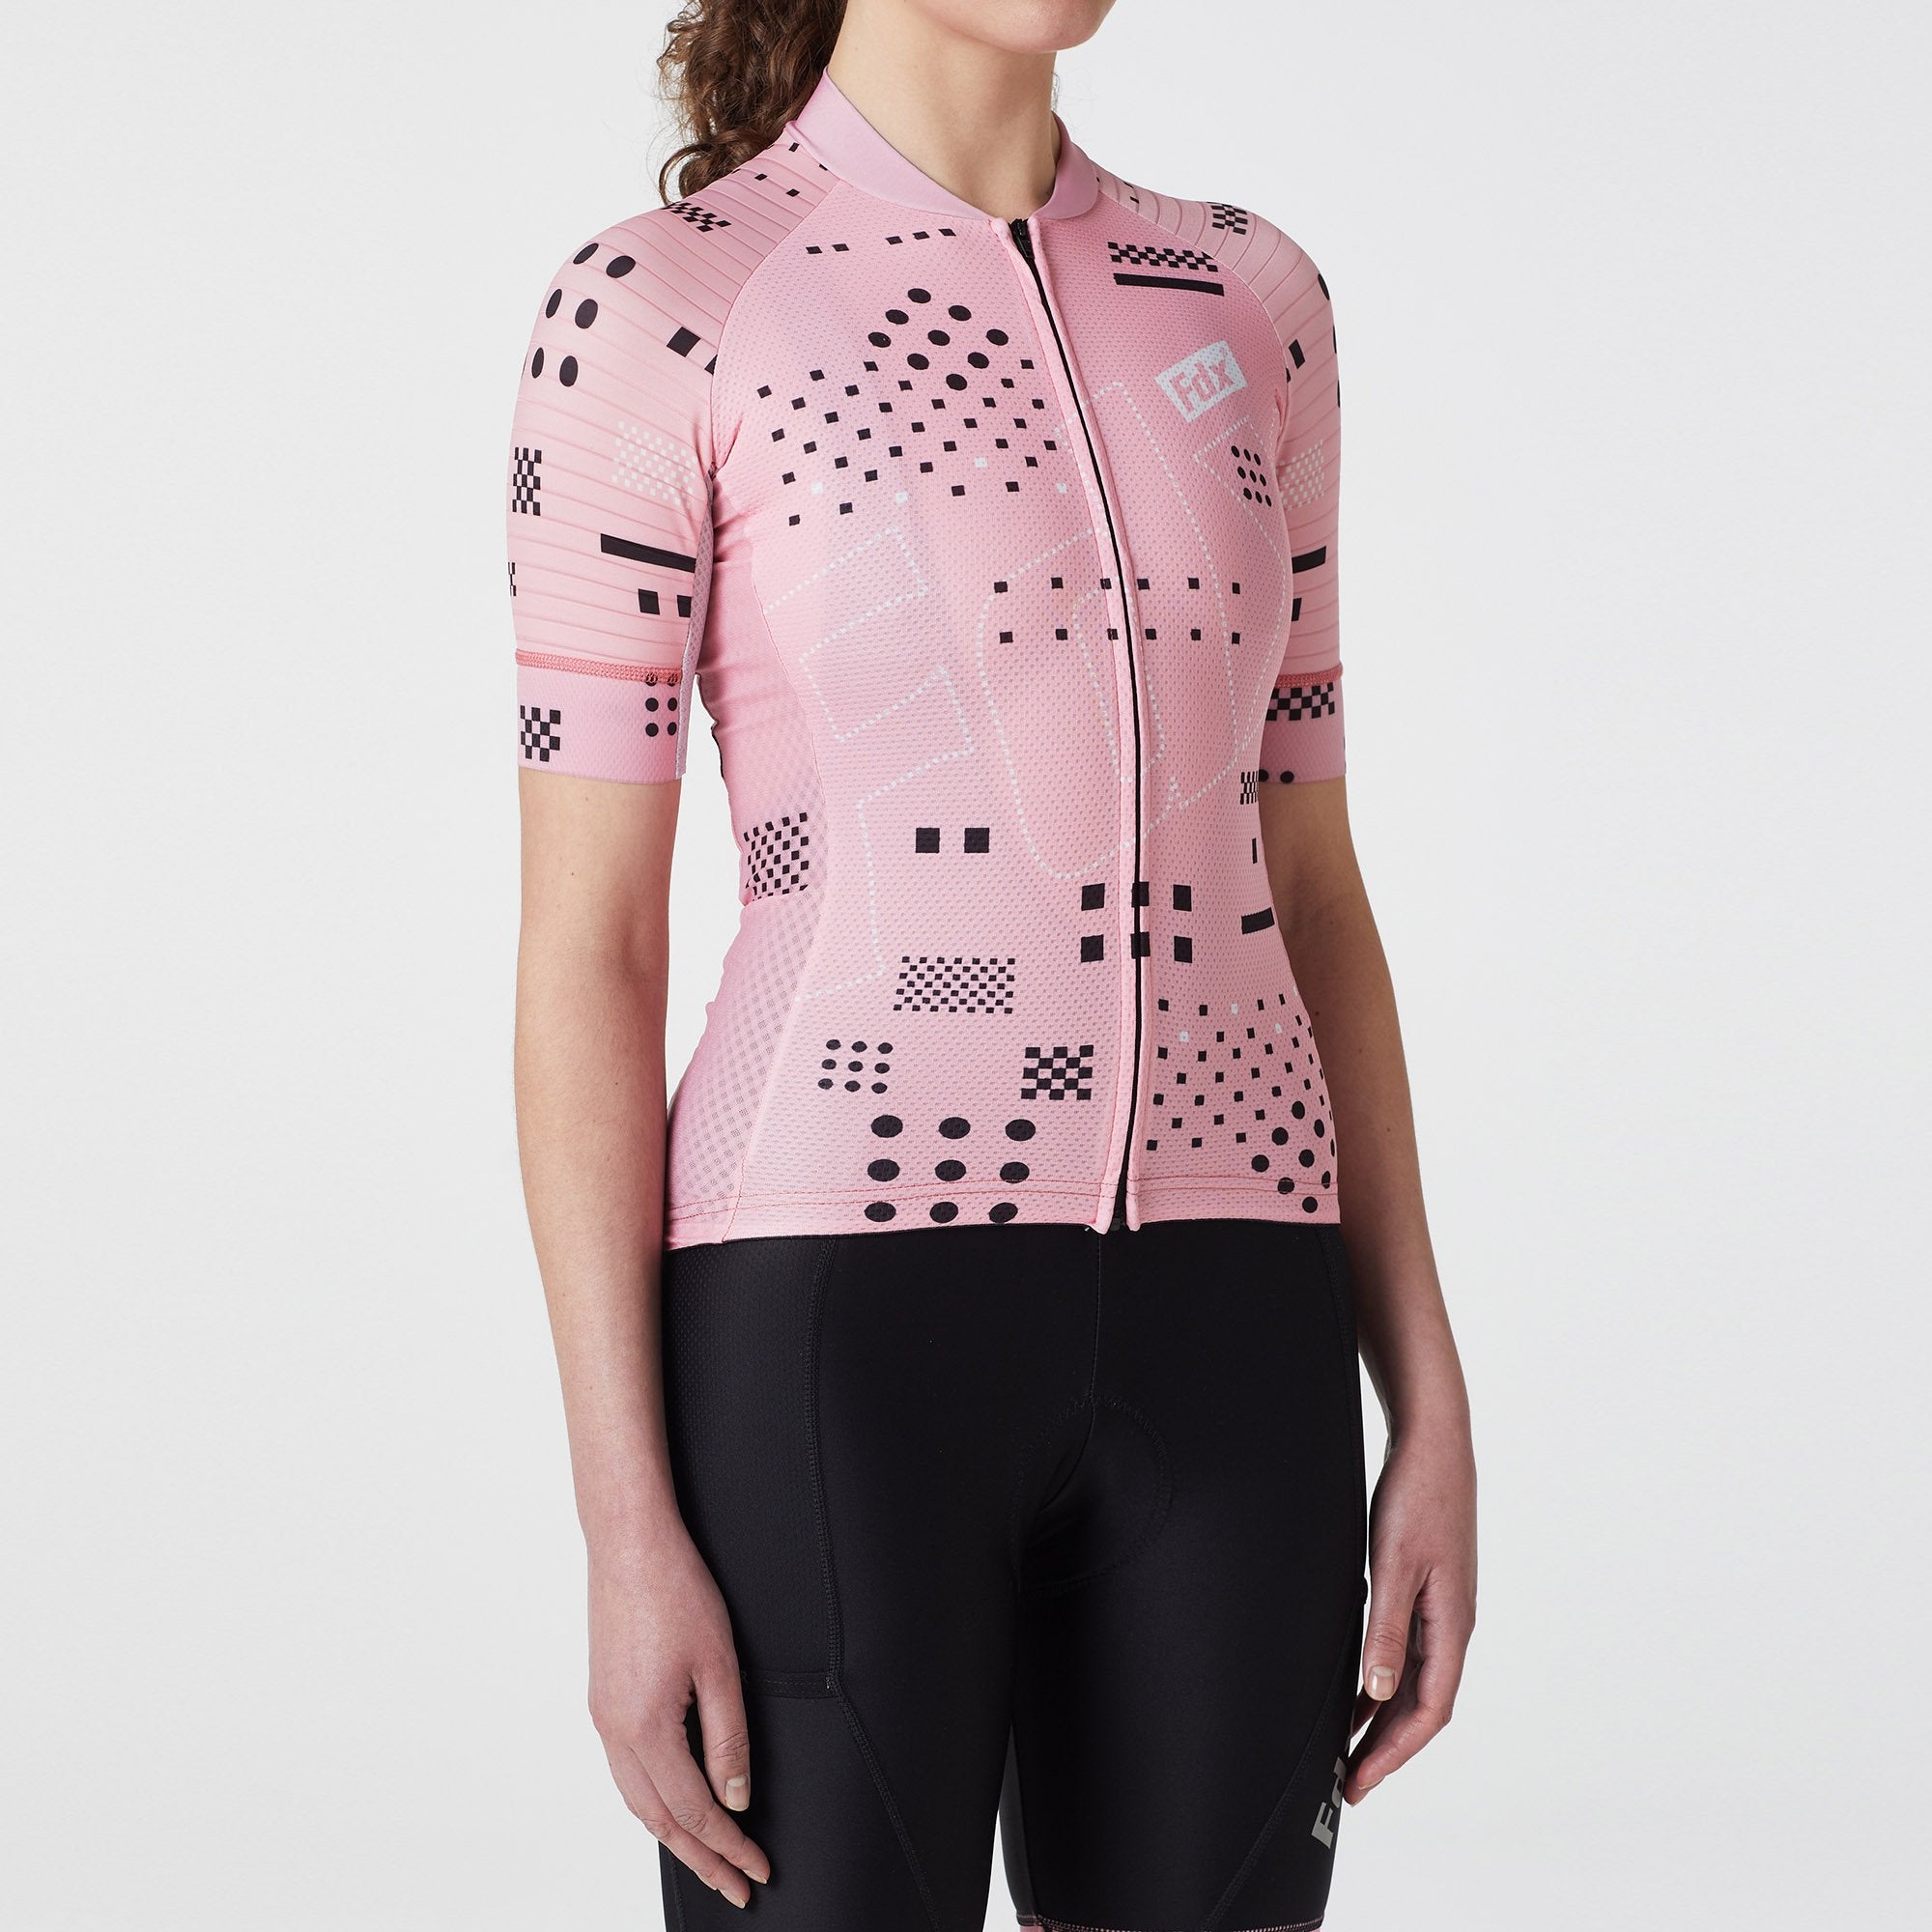 Buy Women's Cycling Clothing & Biking Accessories on Sale Prices